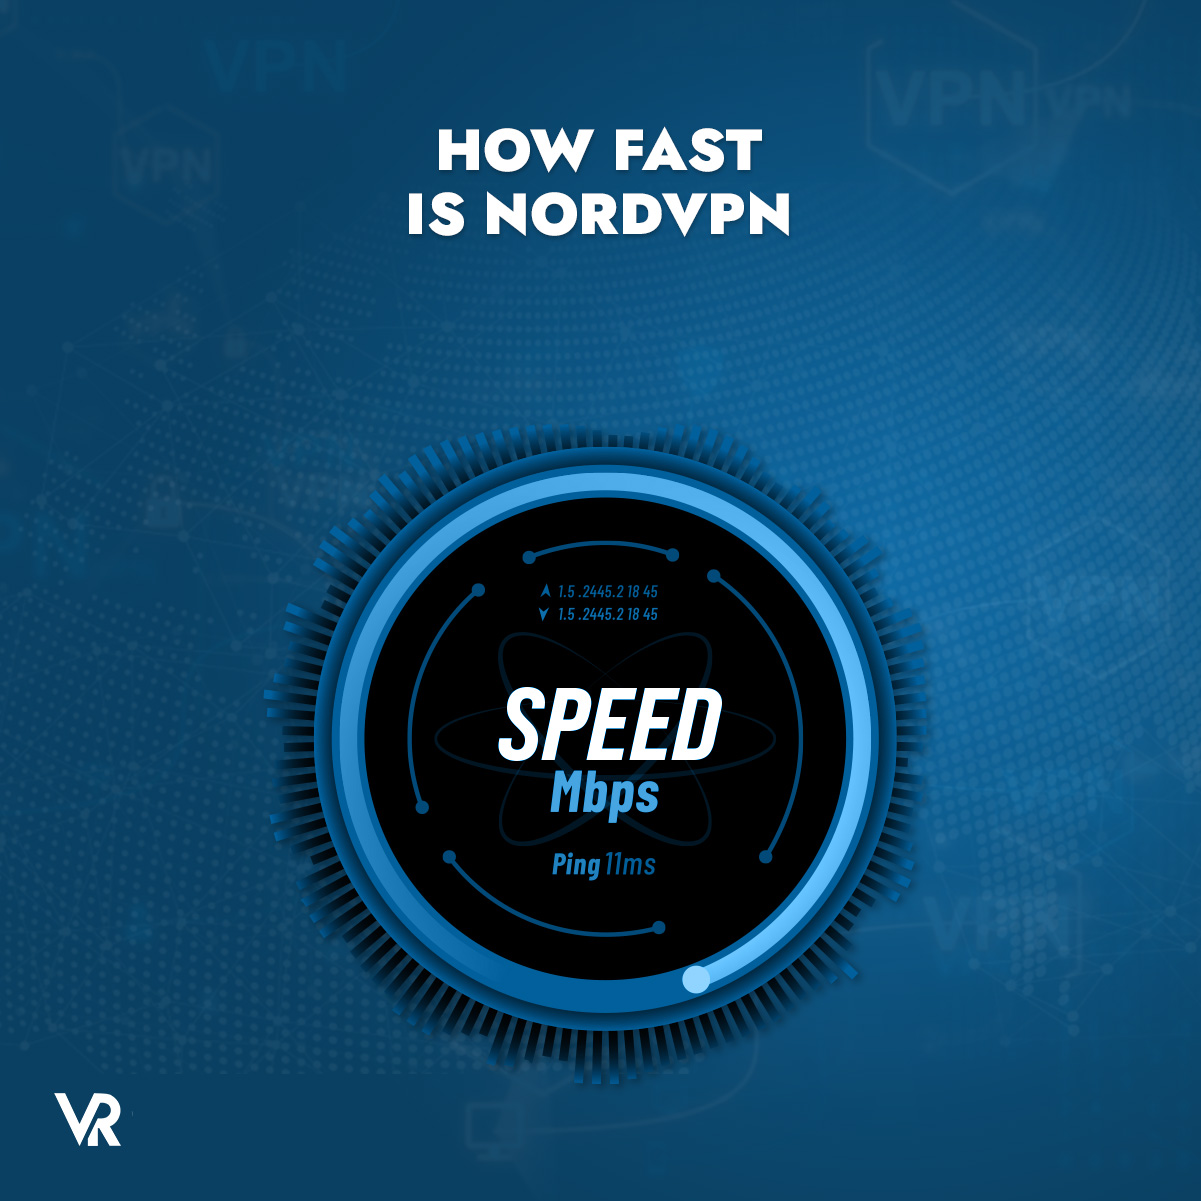 Is NordVPN the fastest?